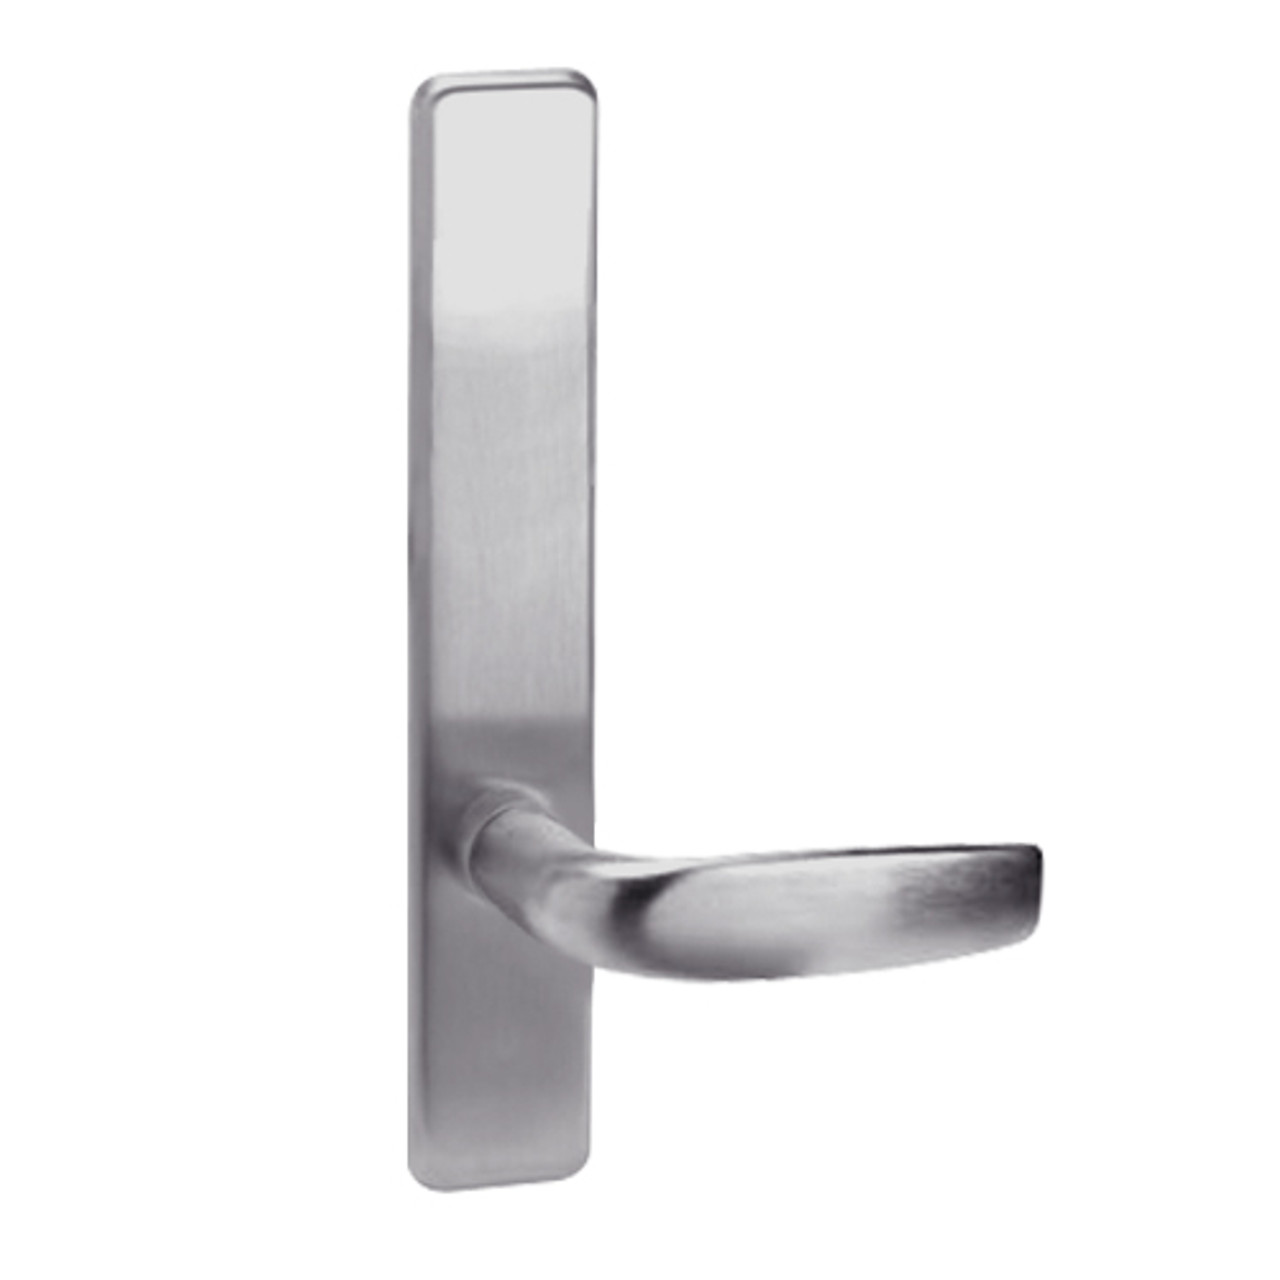 C810-630-LHR Corbin ED4000 Series Exit Device Trim with Passage Citation Lever in Satin Stainless Steel Finish